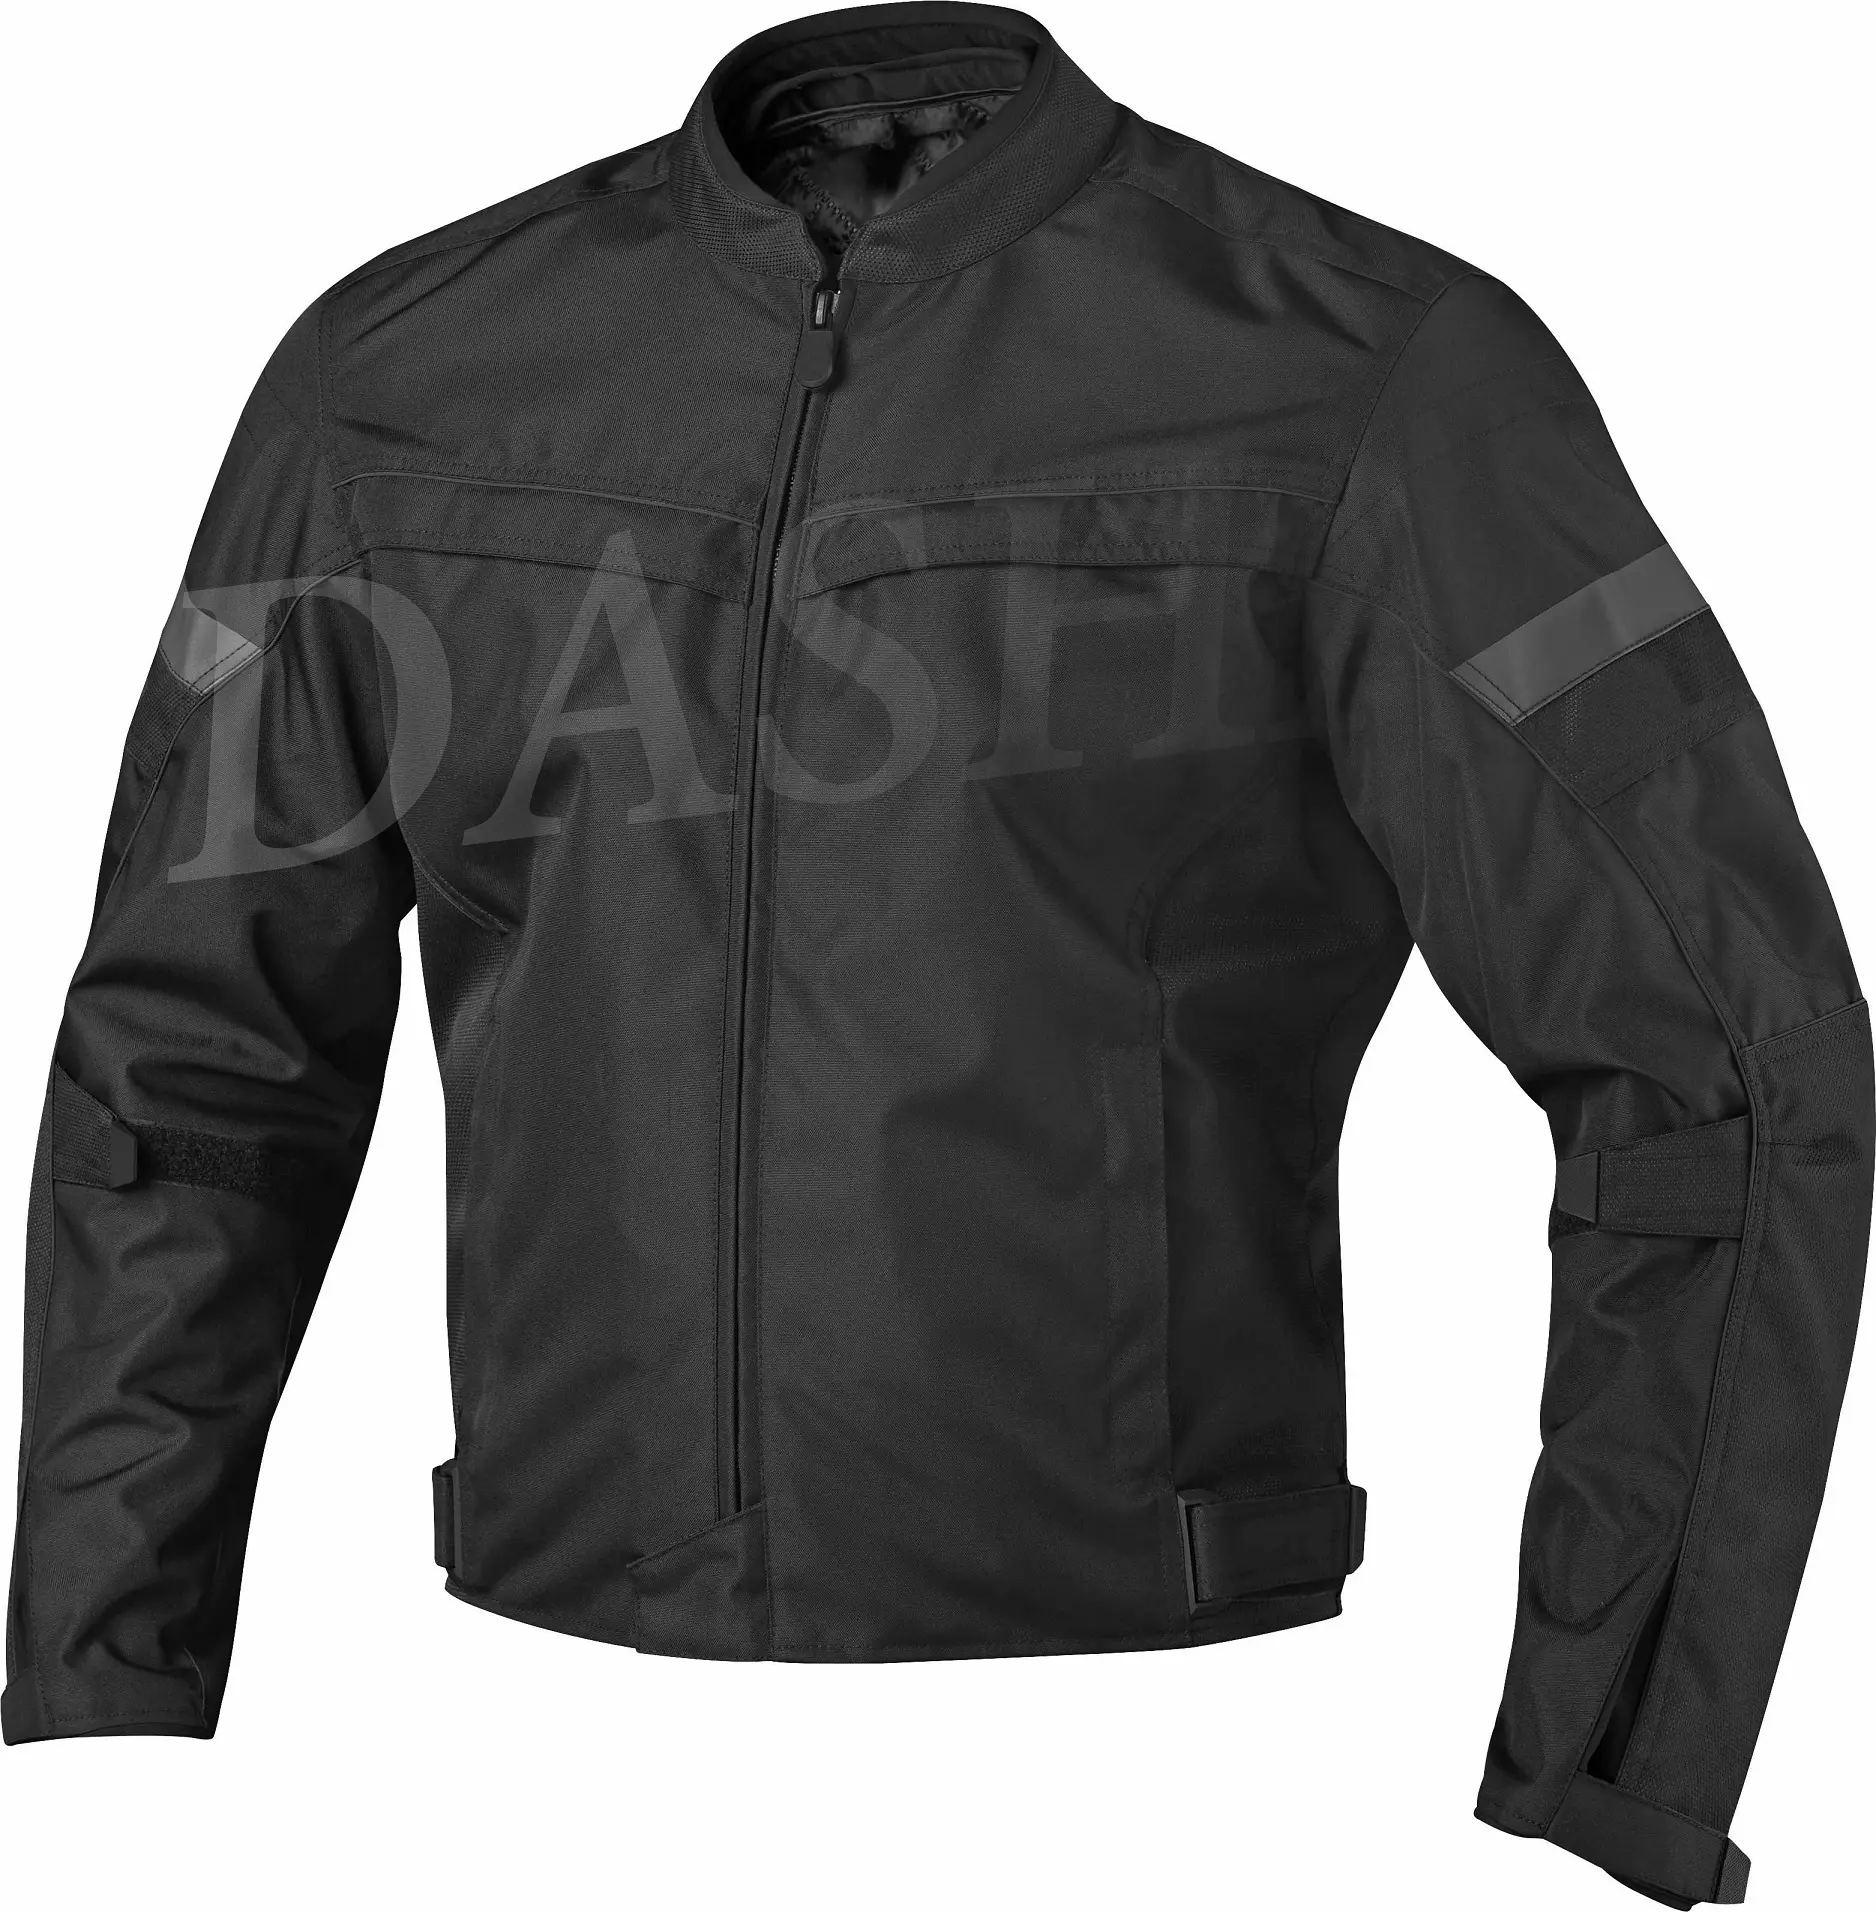 Premium Quality Short Motorcycle Jacket for Professional with CE approved Protector in Black Colour for Mens